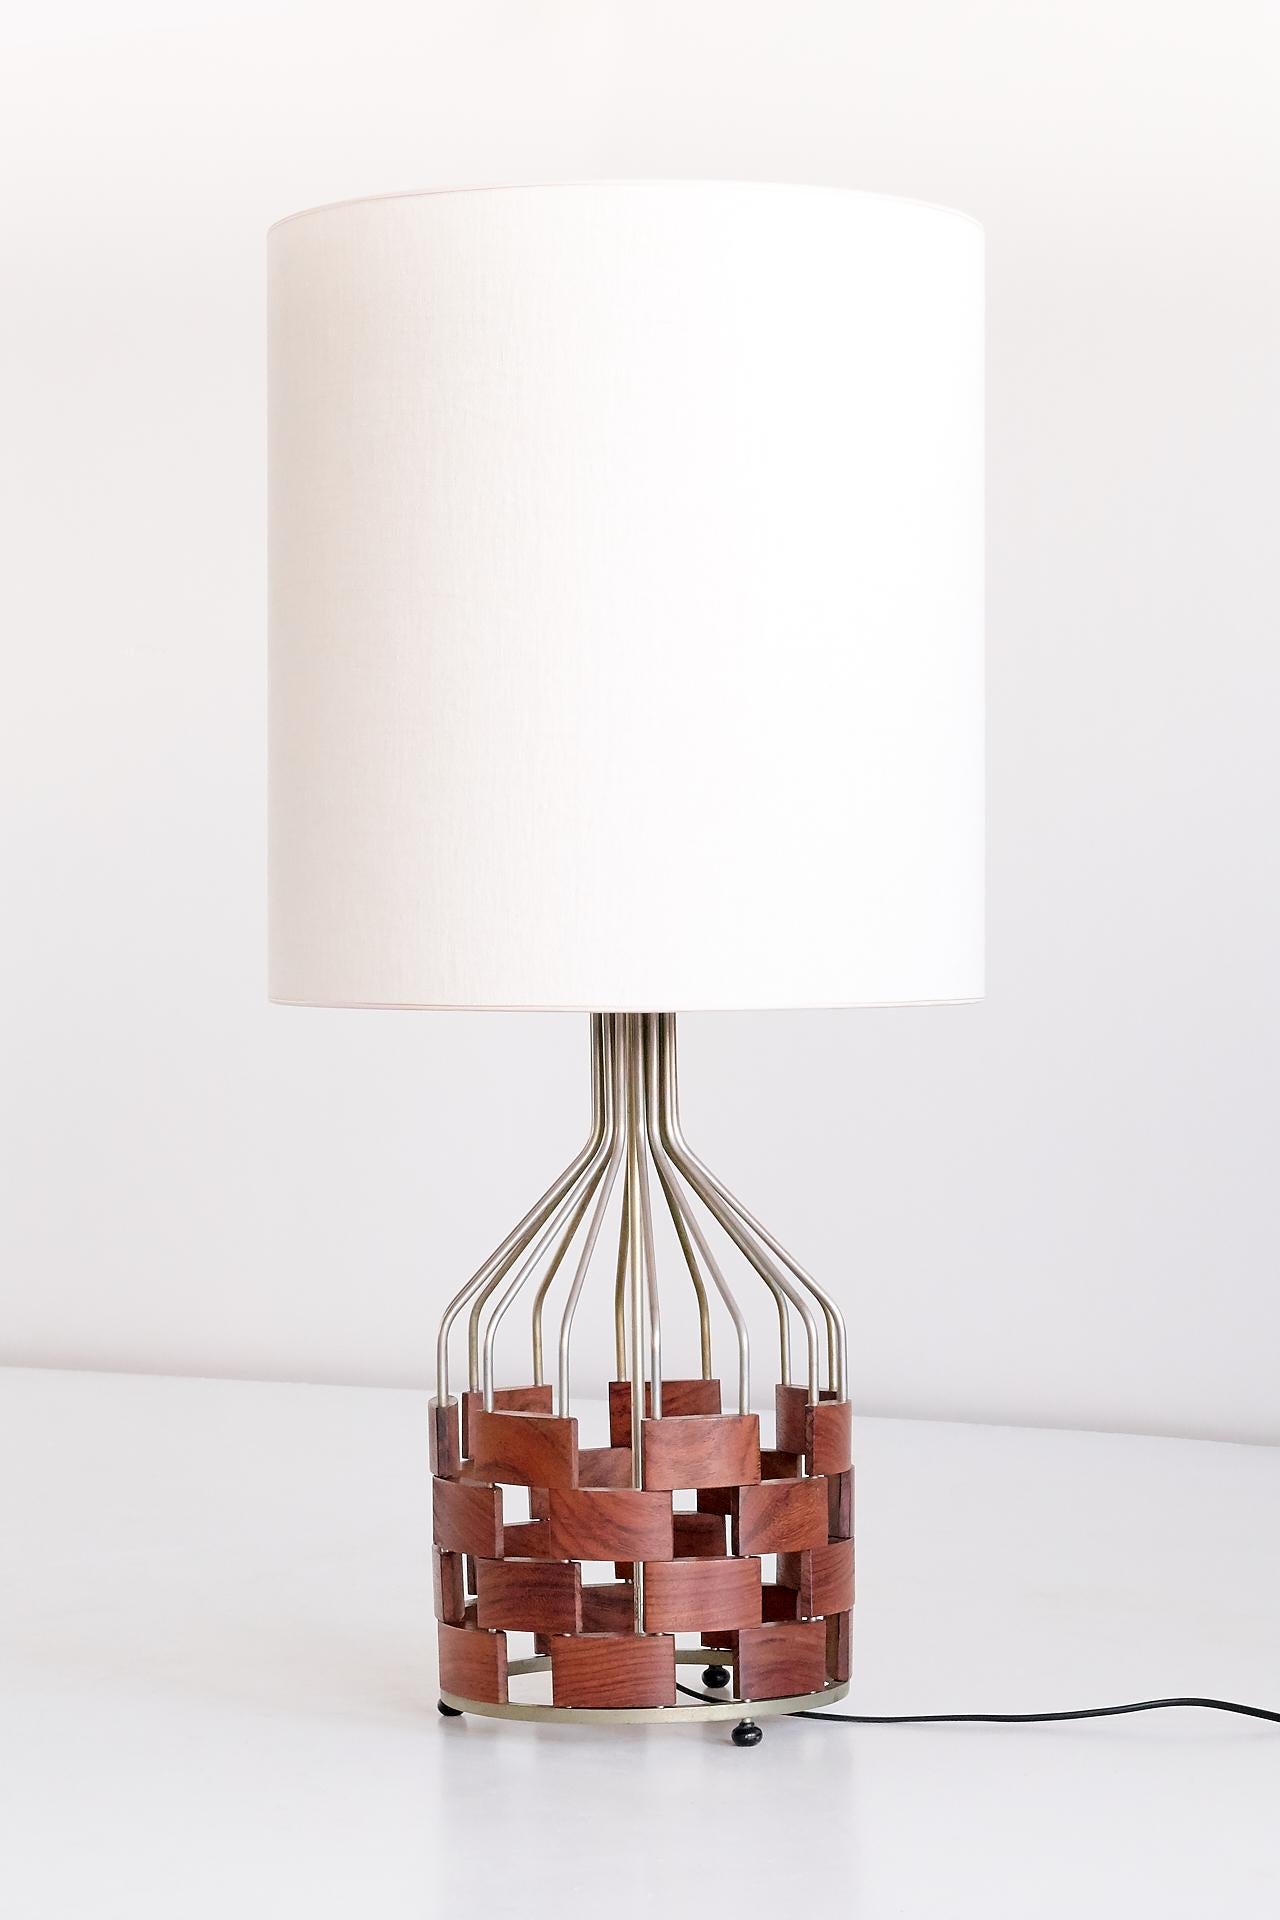 This generously sized table lamp was designed by Maurizio Tempestini and manufactured by the Florentine Casey Fantin company in 1961. The wire frame of this rare model is made of nickel plated brass. The rectangular wooden components display a